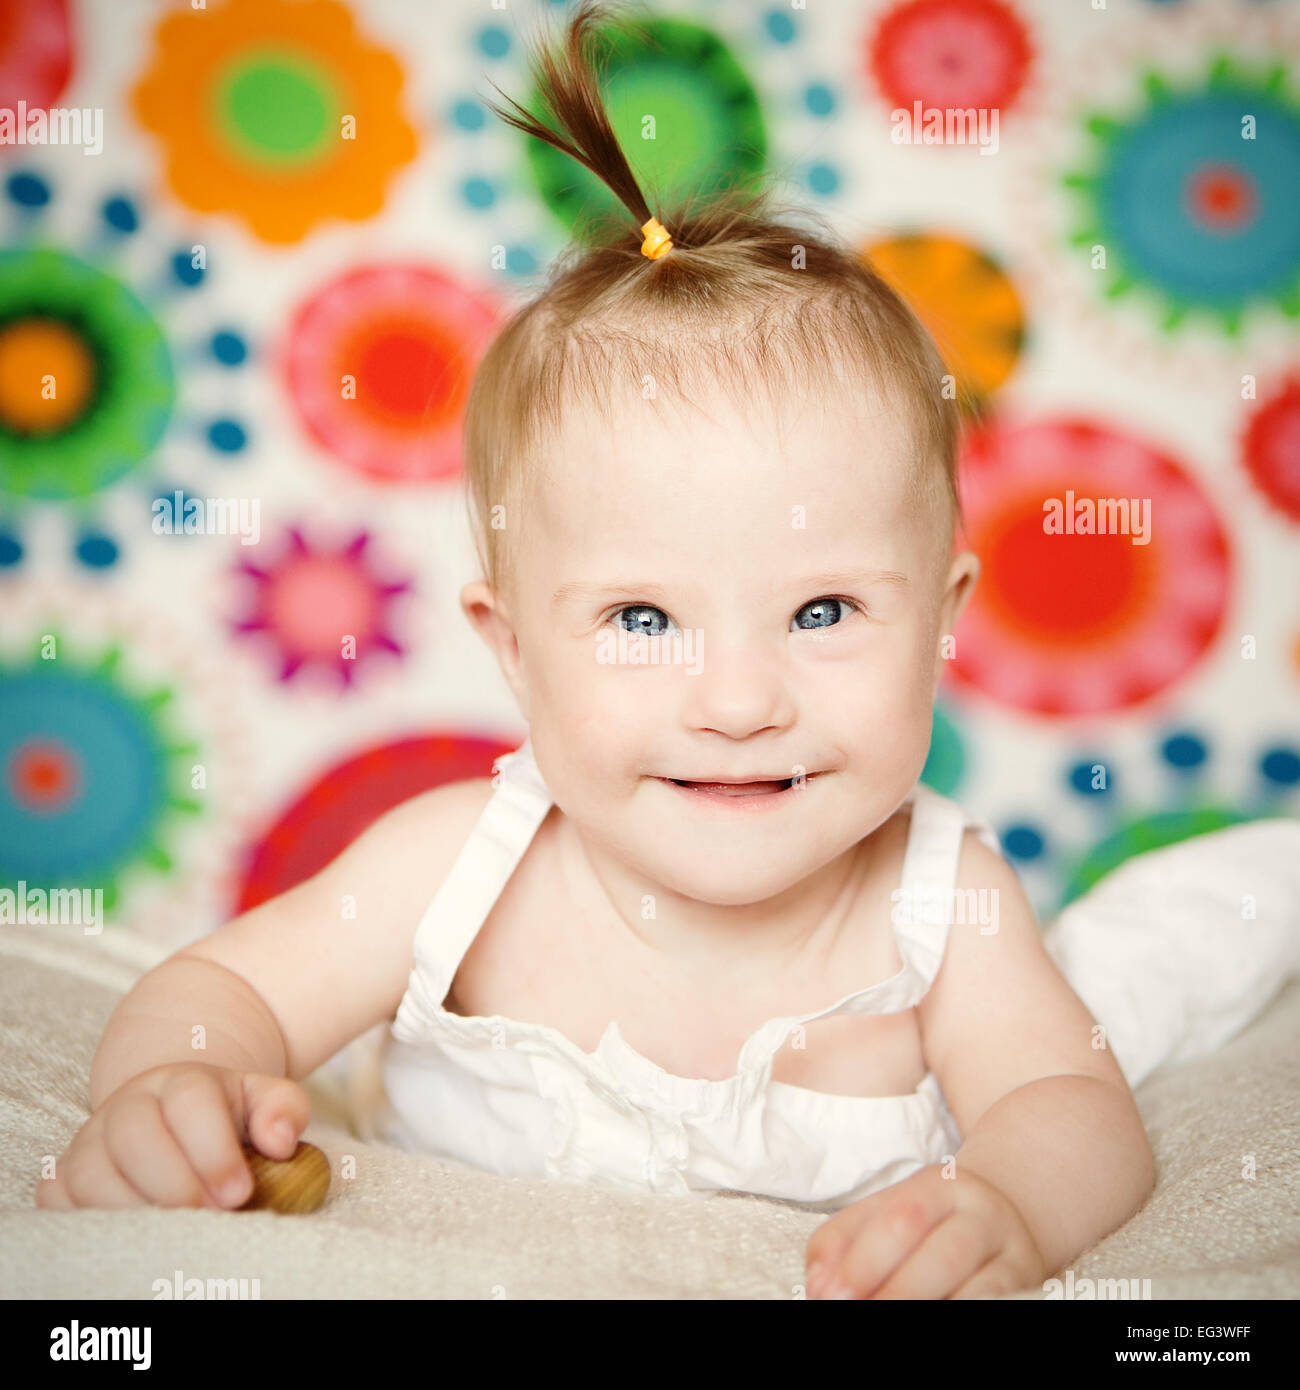 little girl with Down syndrome Stock Photo